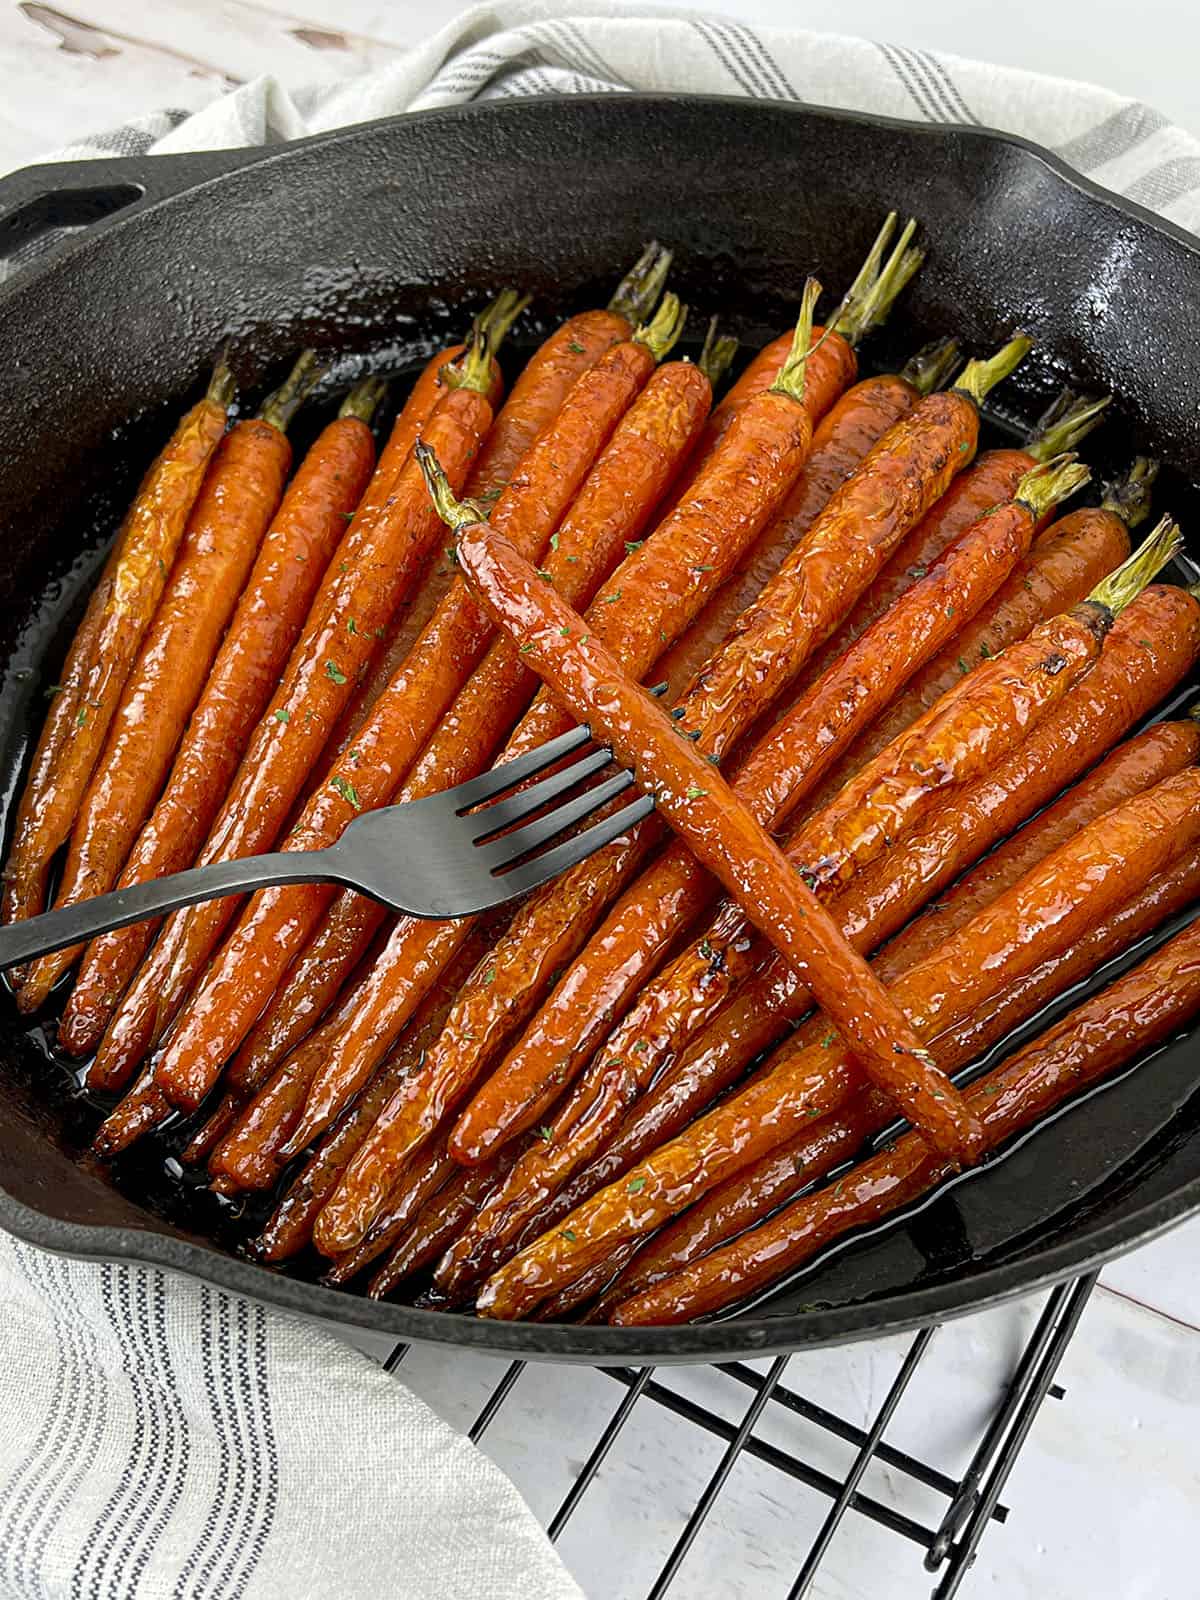 The roasted carrots are in a pan with a fork peircing one of the cooked carrots.